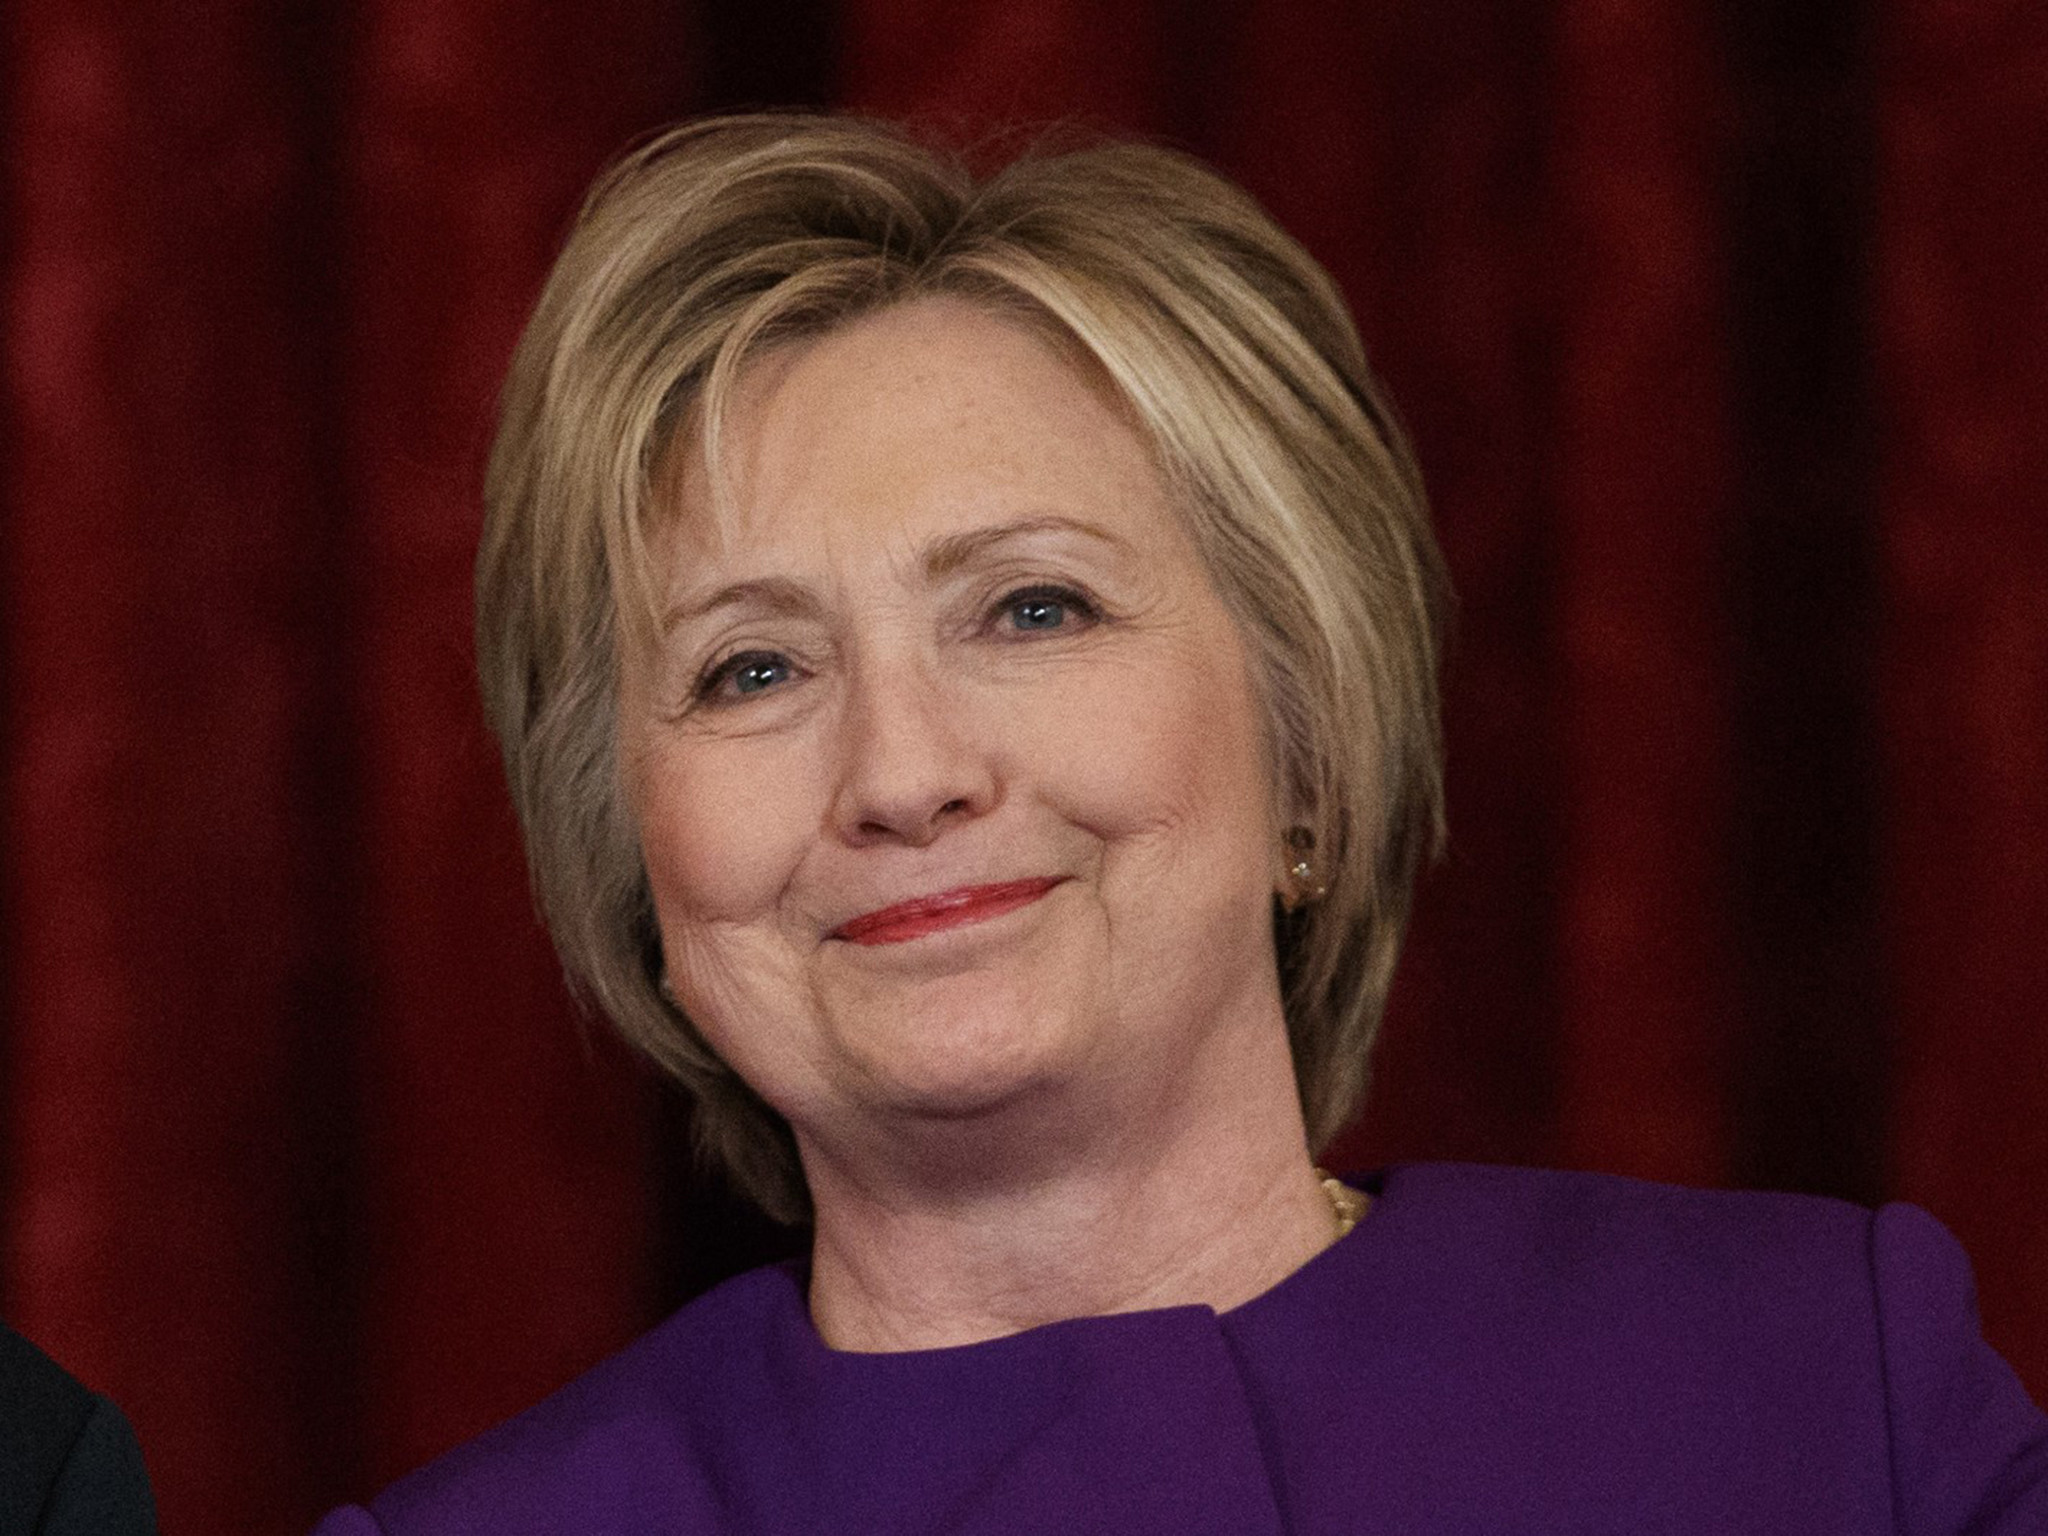 2048x1536 Hillary Clinton receives standing ovations at rare public outing to see The  Colour Purple on Broadway | The Independent